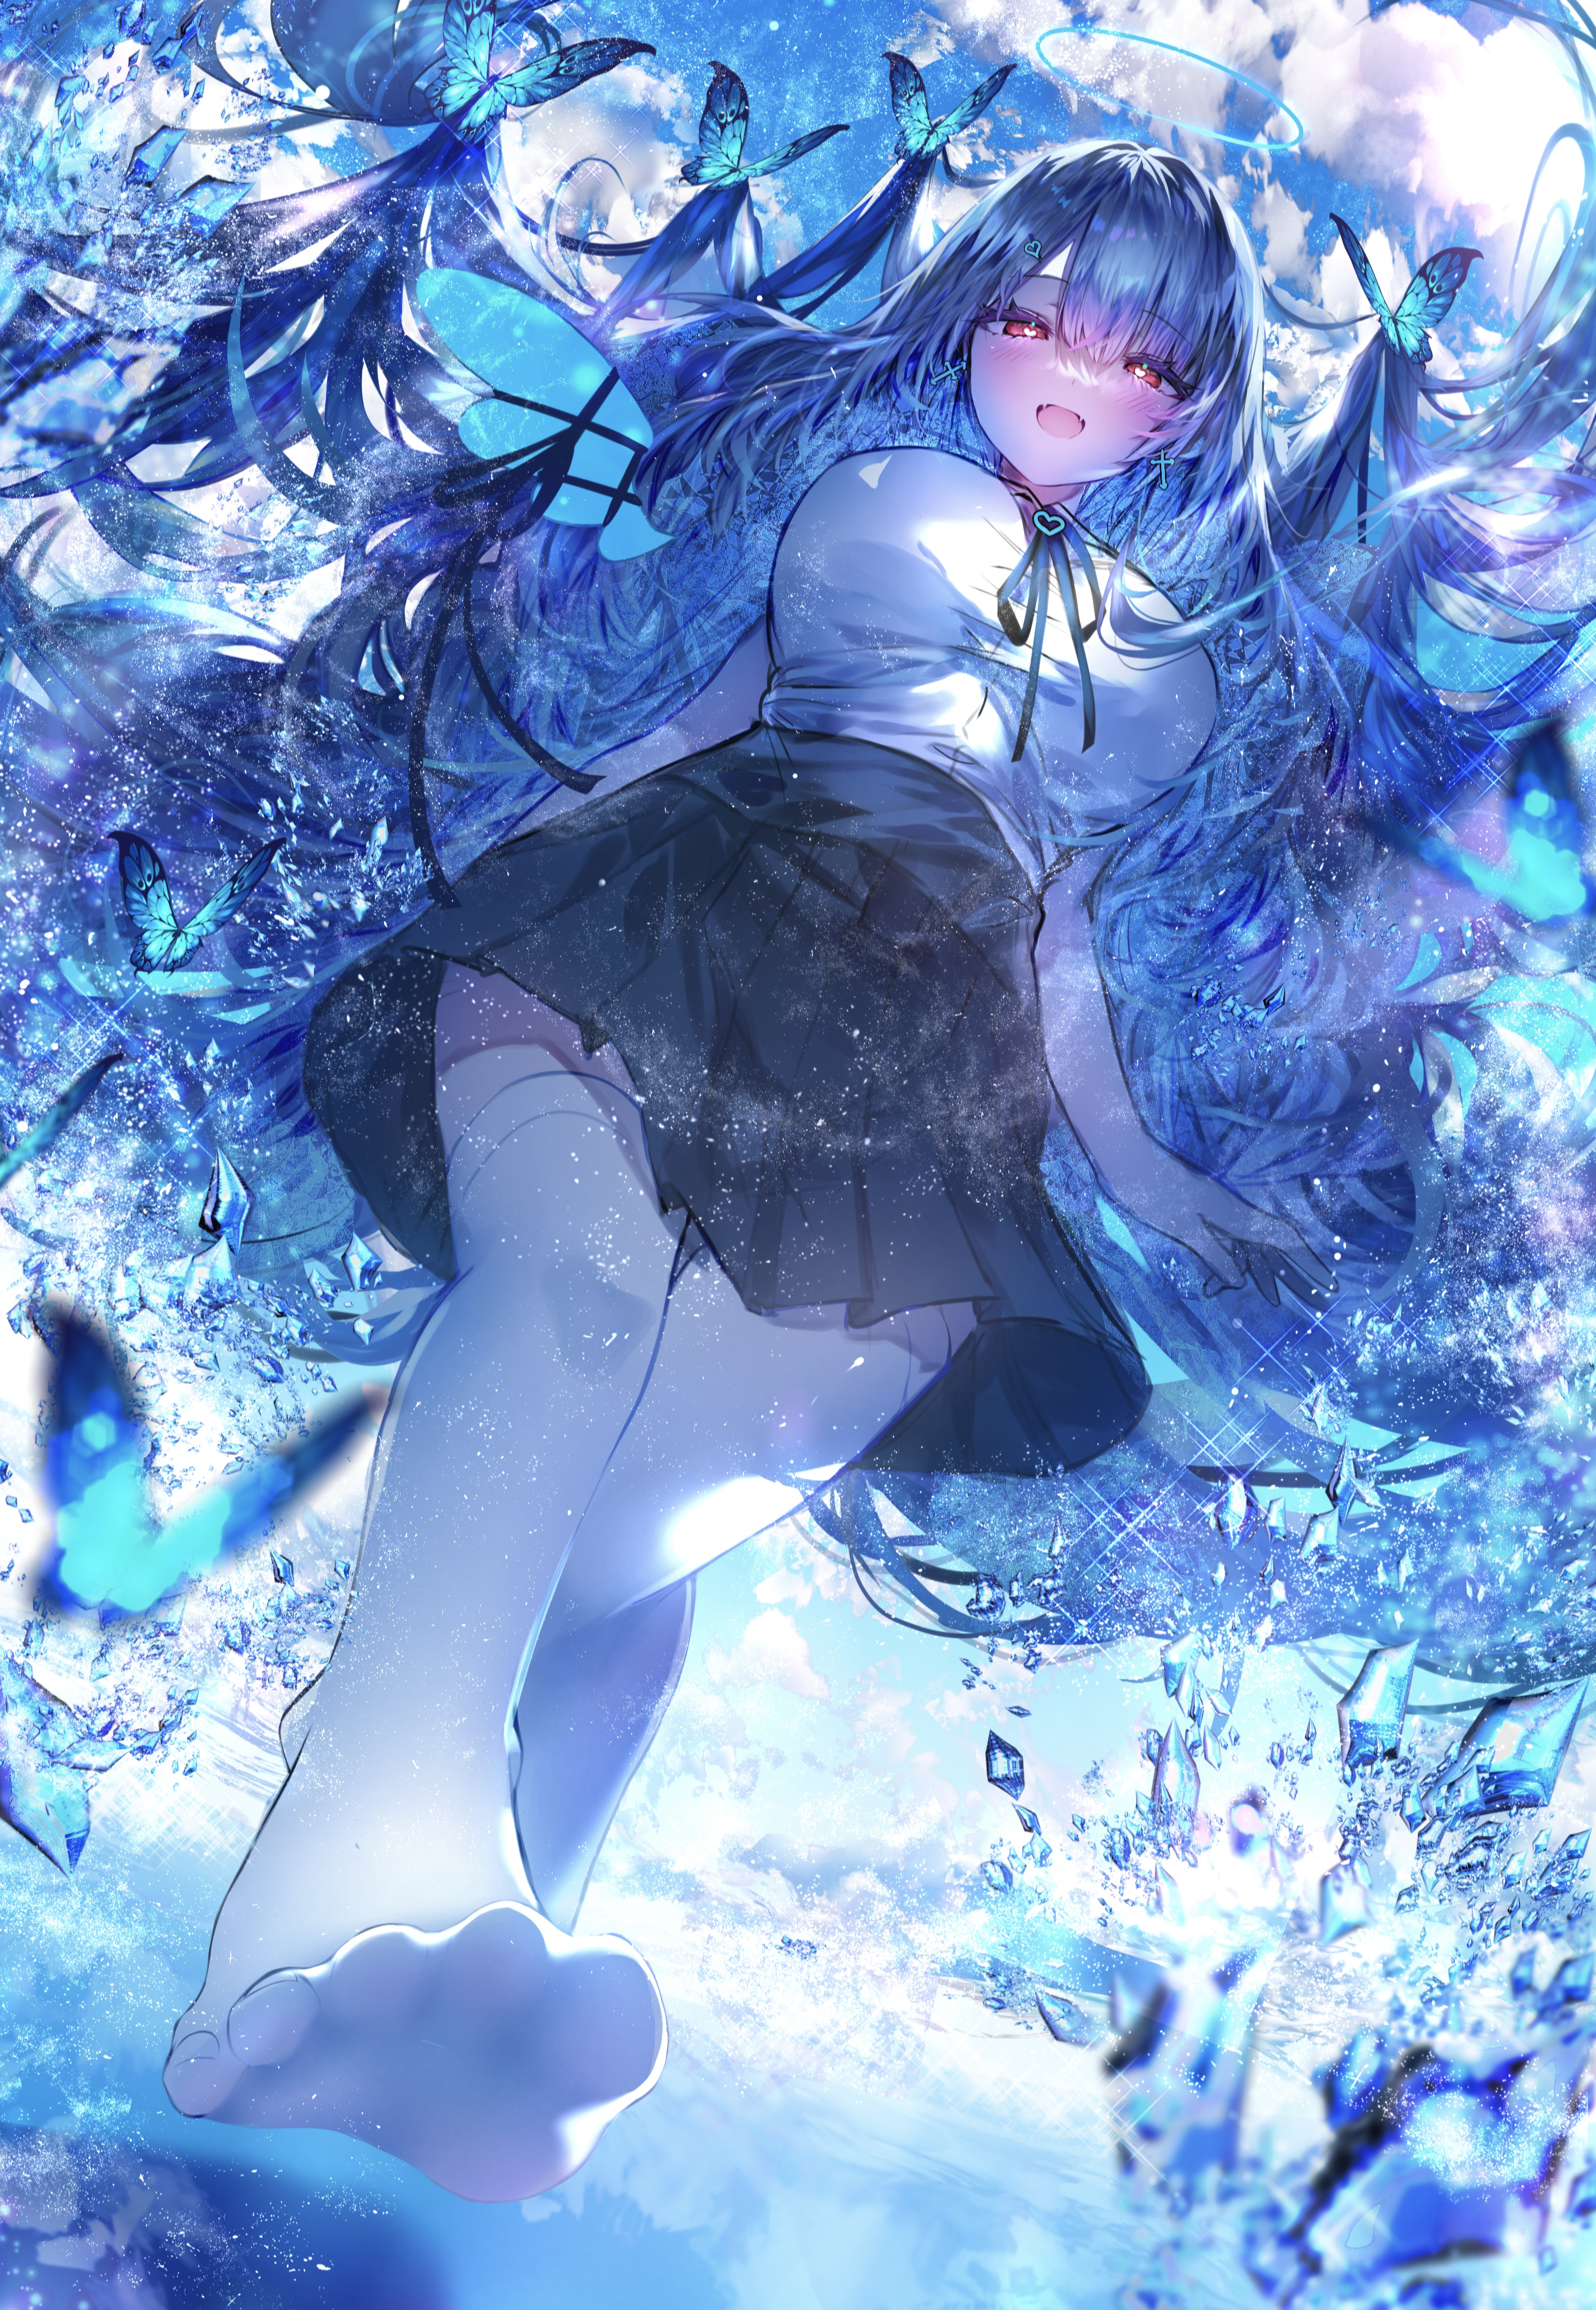 Anime 2988x4324 Pixiv W (artist) anime anime girls portrait display stockings feet butterfly long hair looking at viewer heart eyes sky clouds water crystal  schoolgirl school uniform insect halo